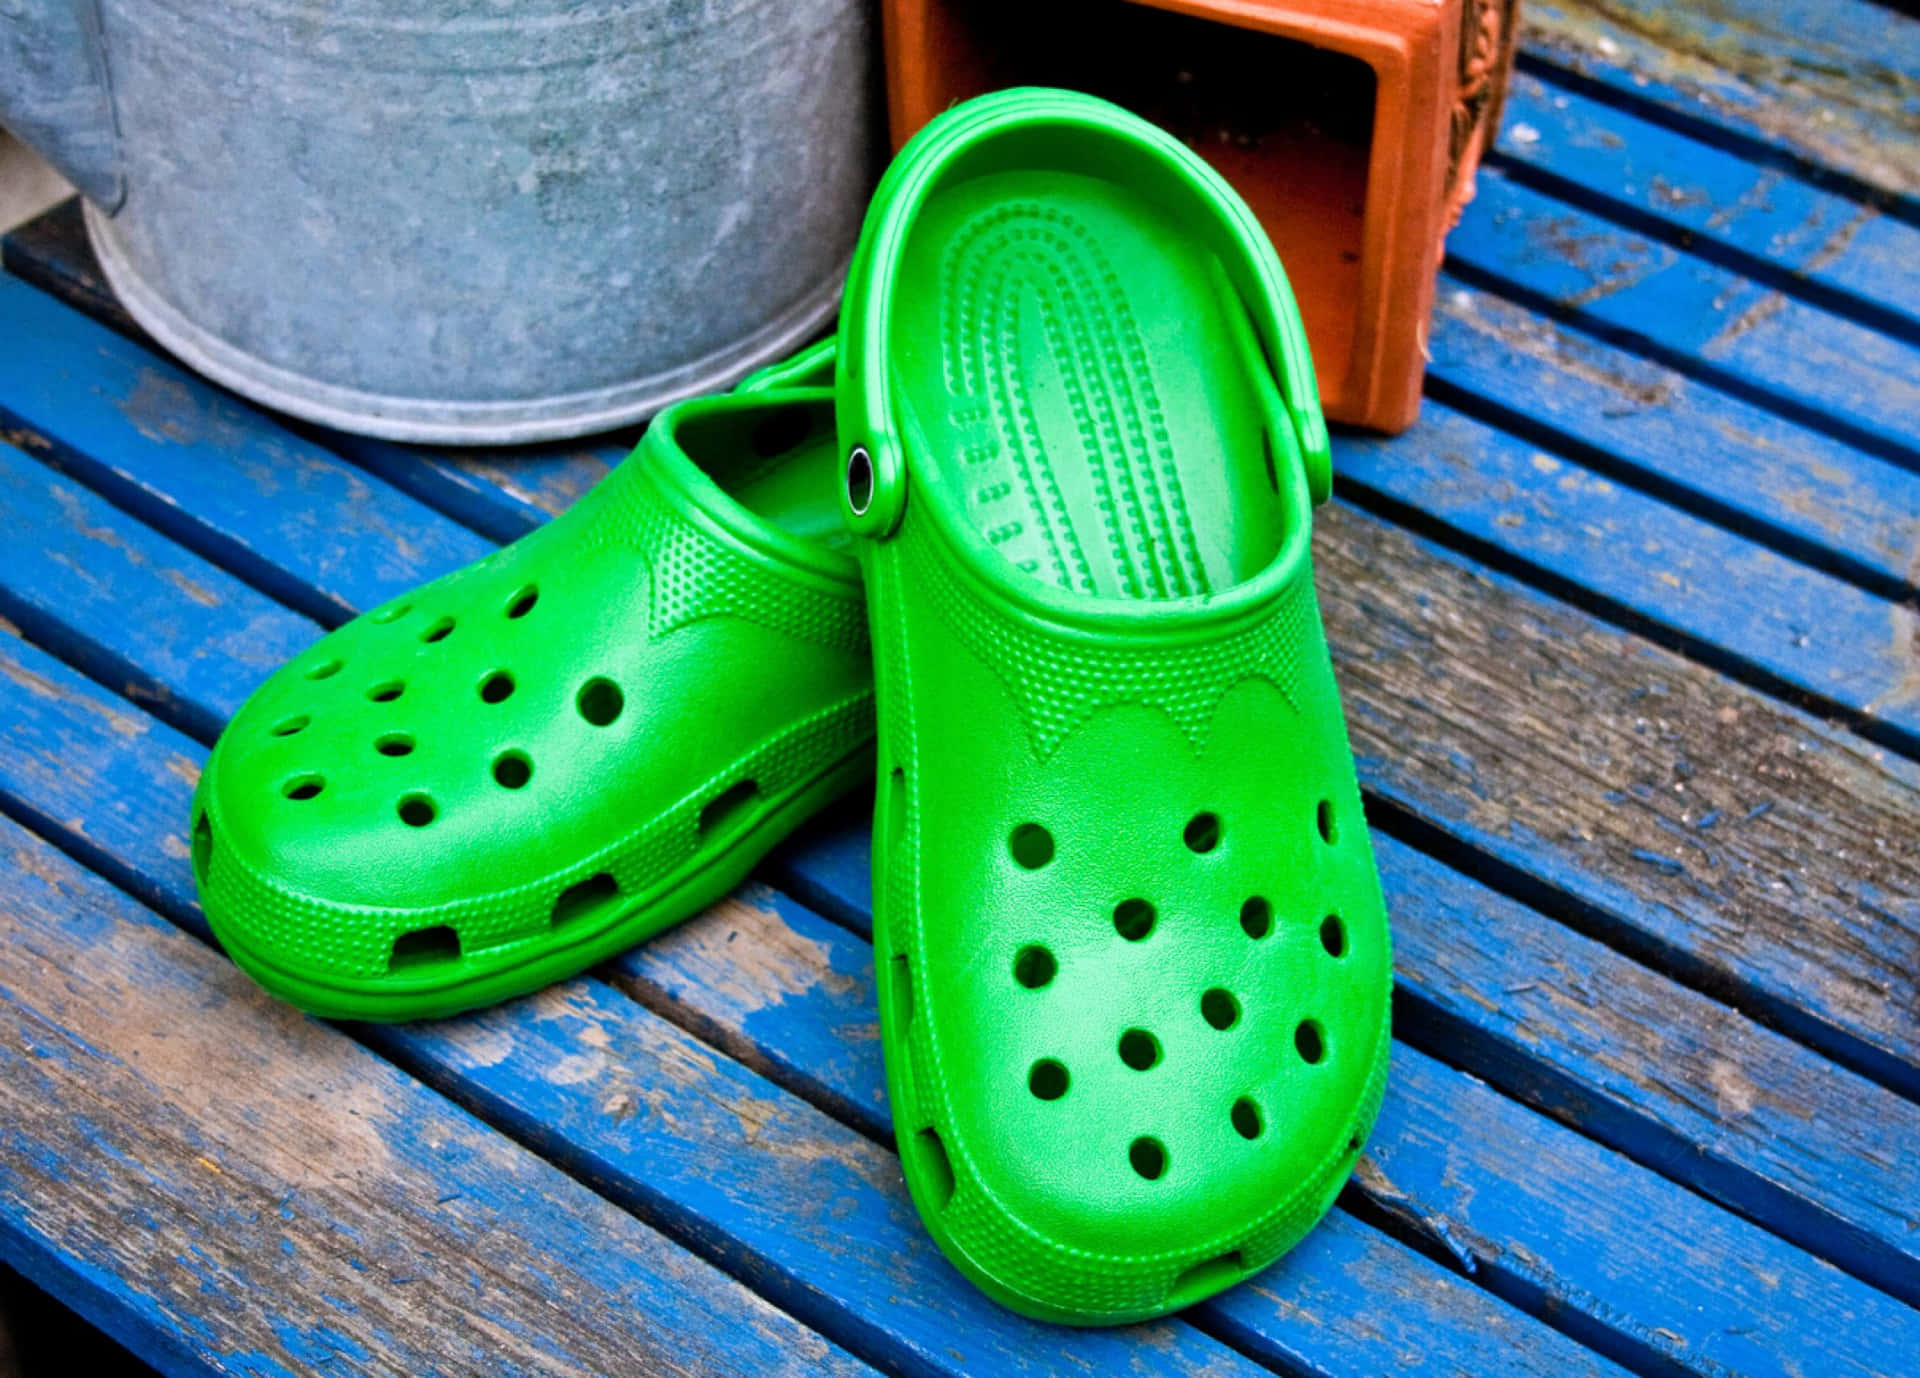 Get Ready to Relax in your Crocs Shoes